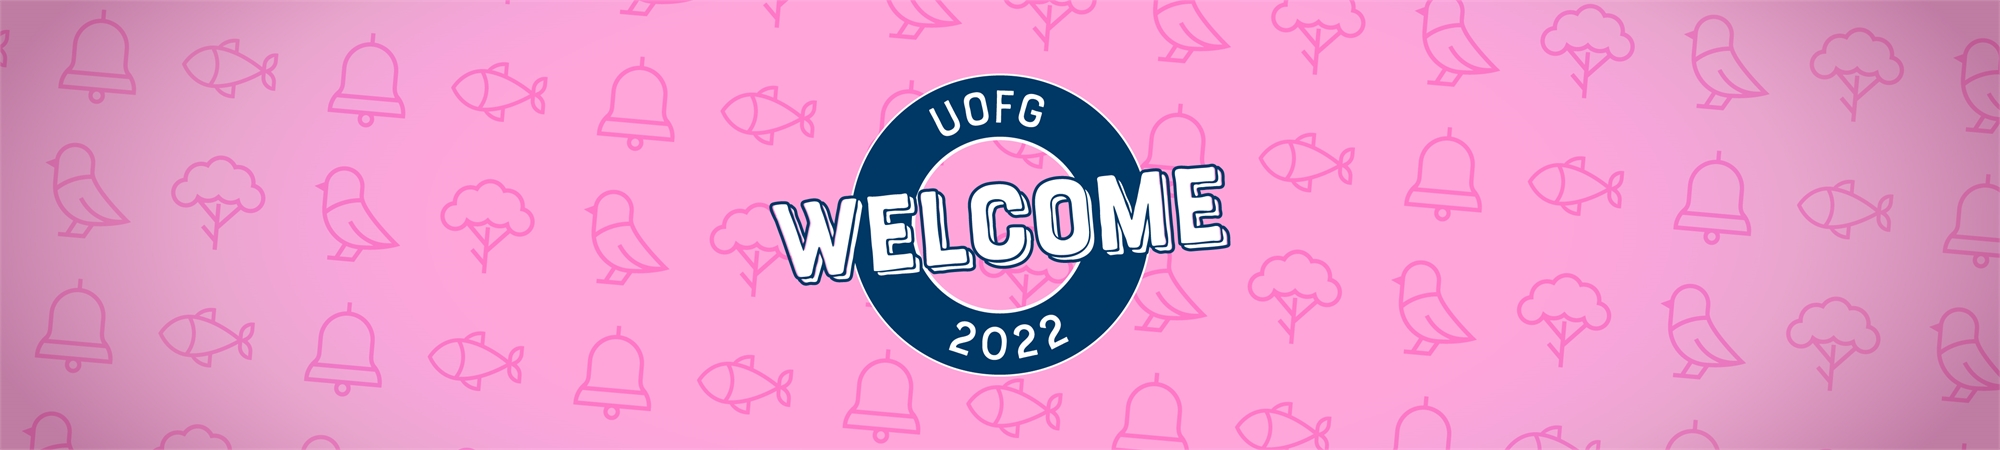 UofG Welcome 2022 | About